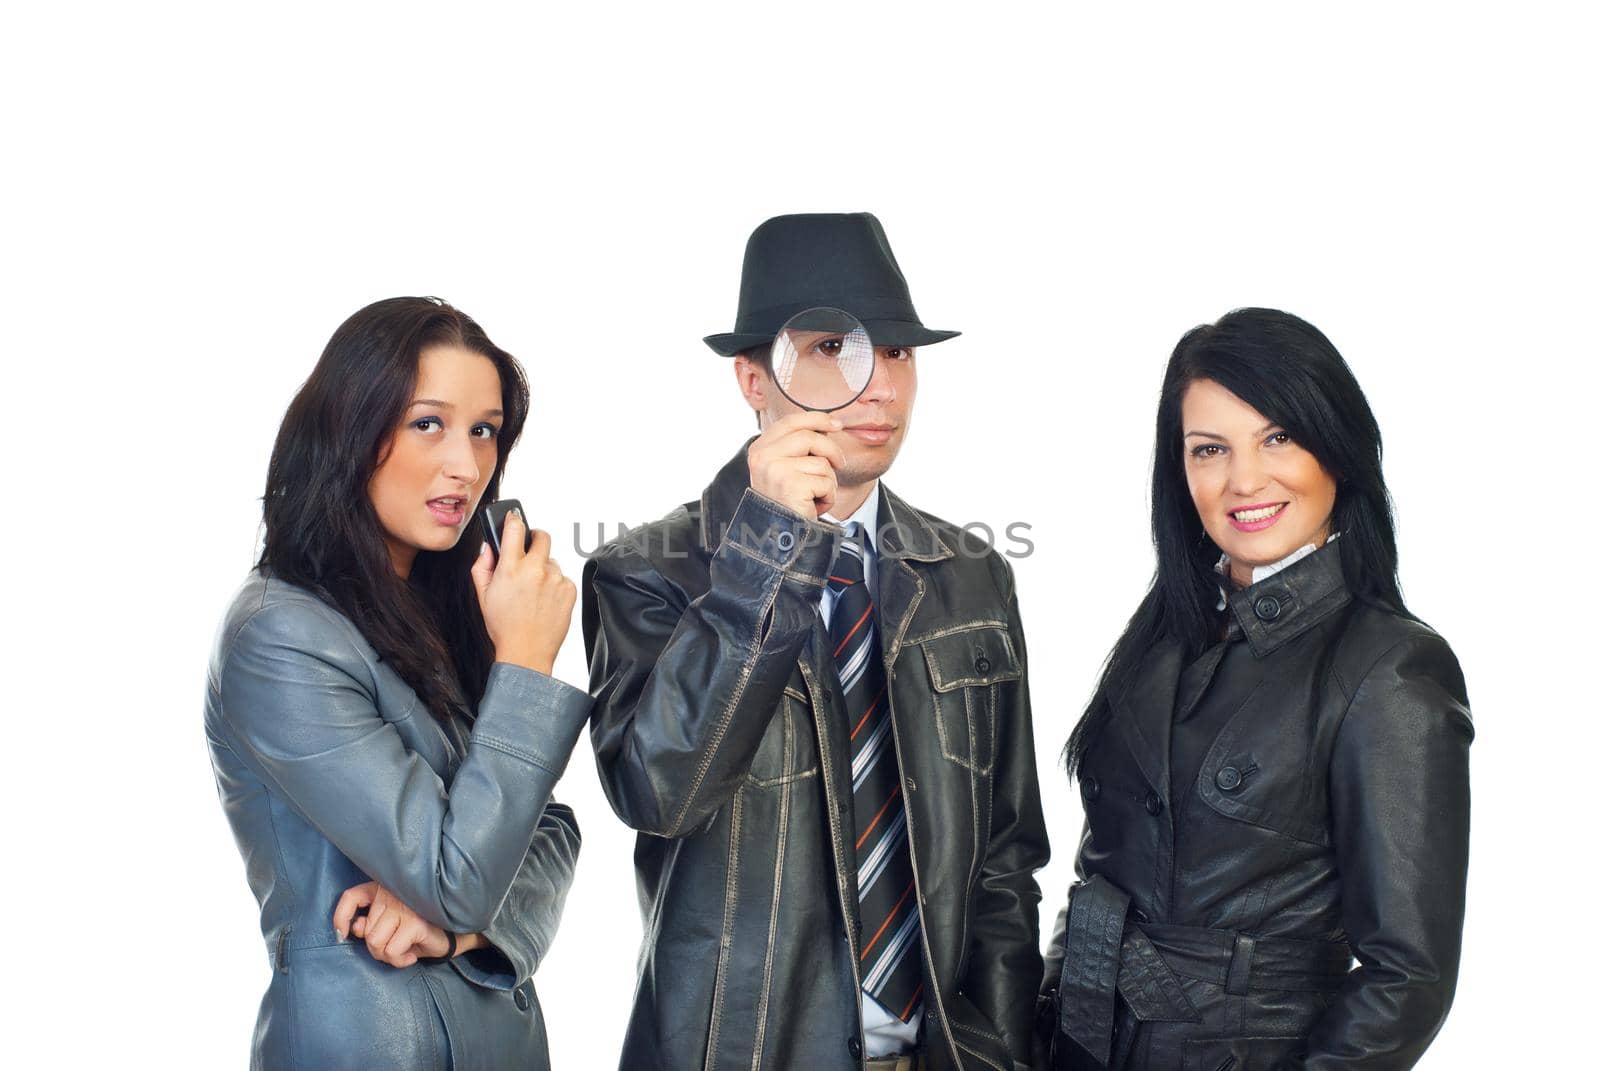 Detective man and women assistants by justmeyo